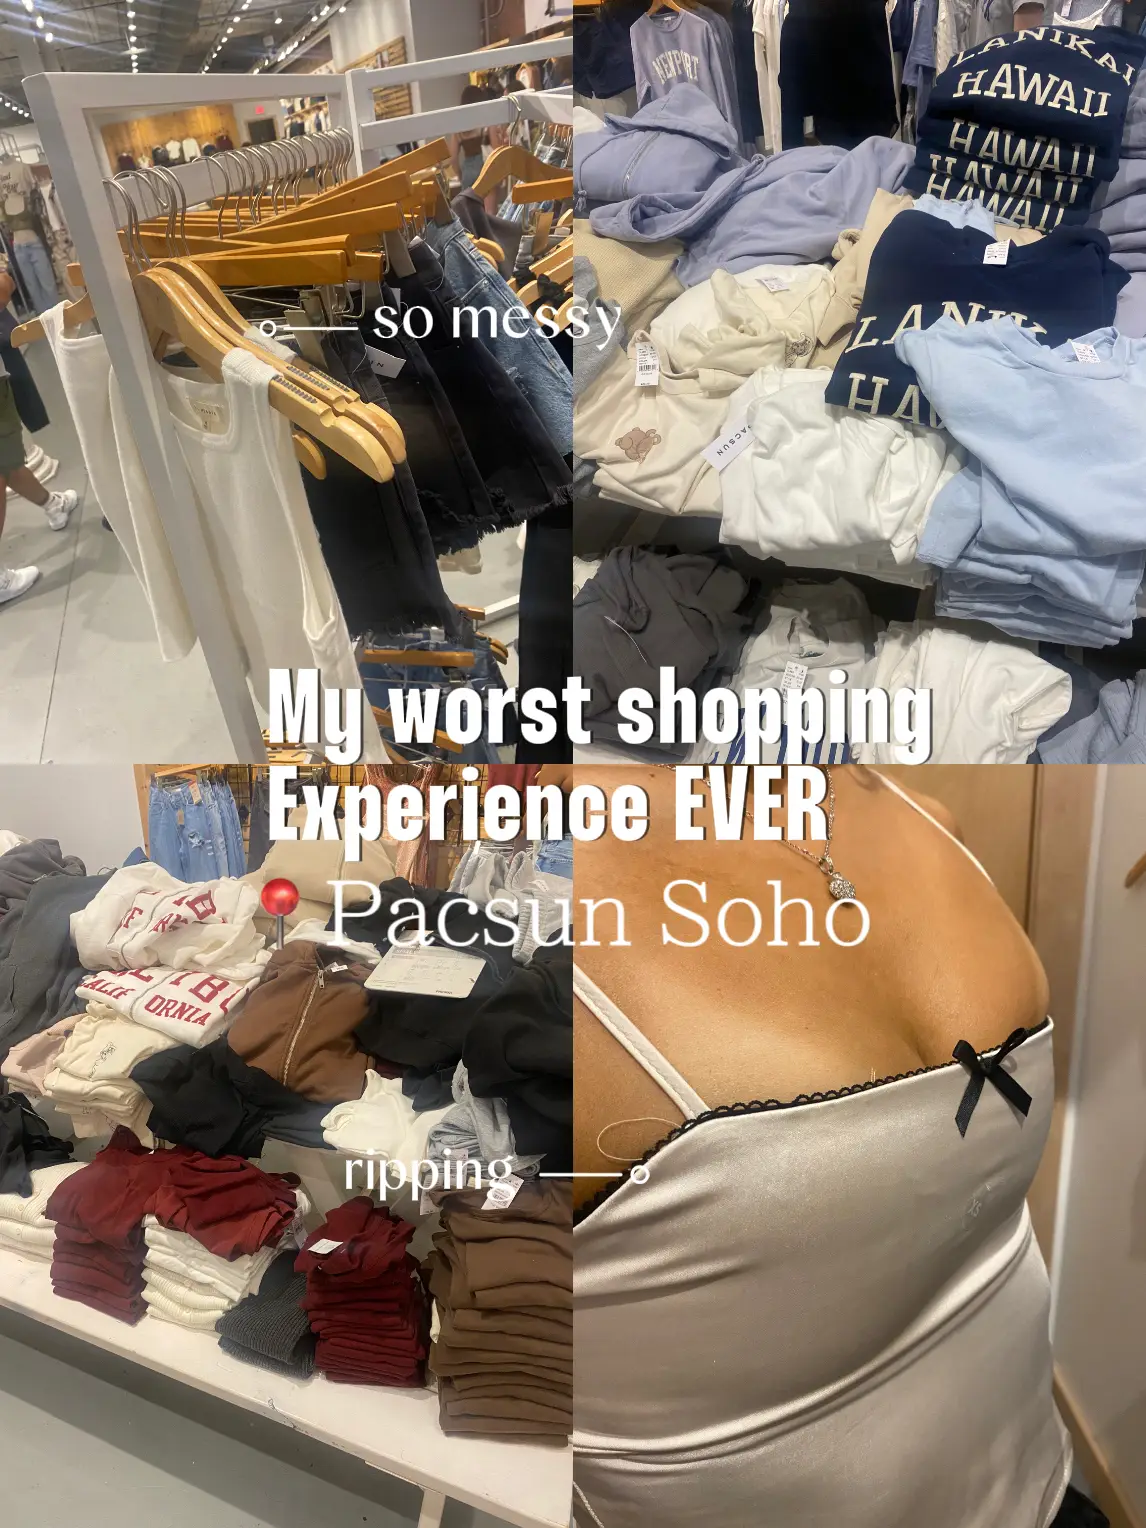 My worst shopping Experience EVER: Pacsun Soho's images